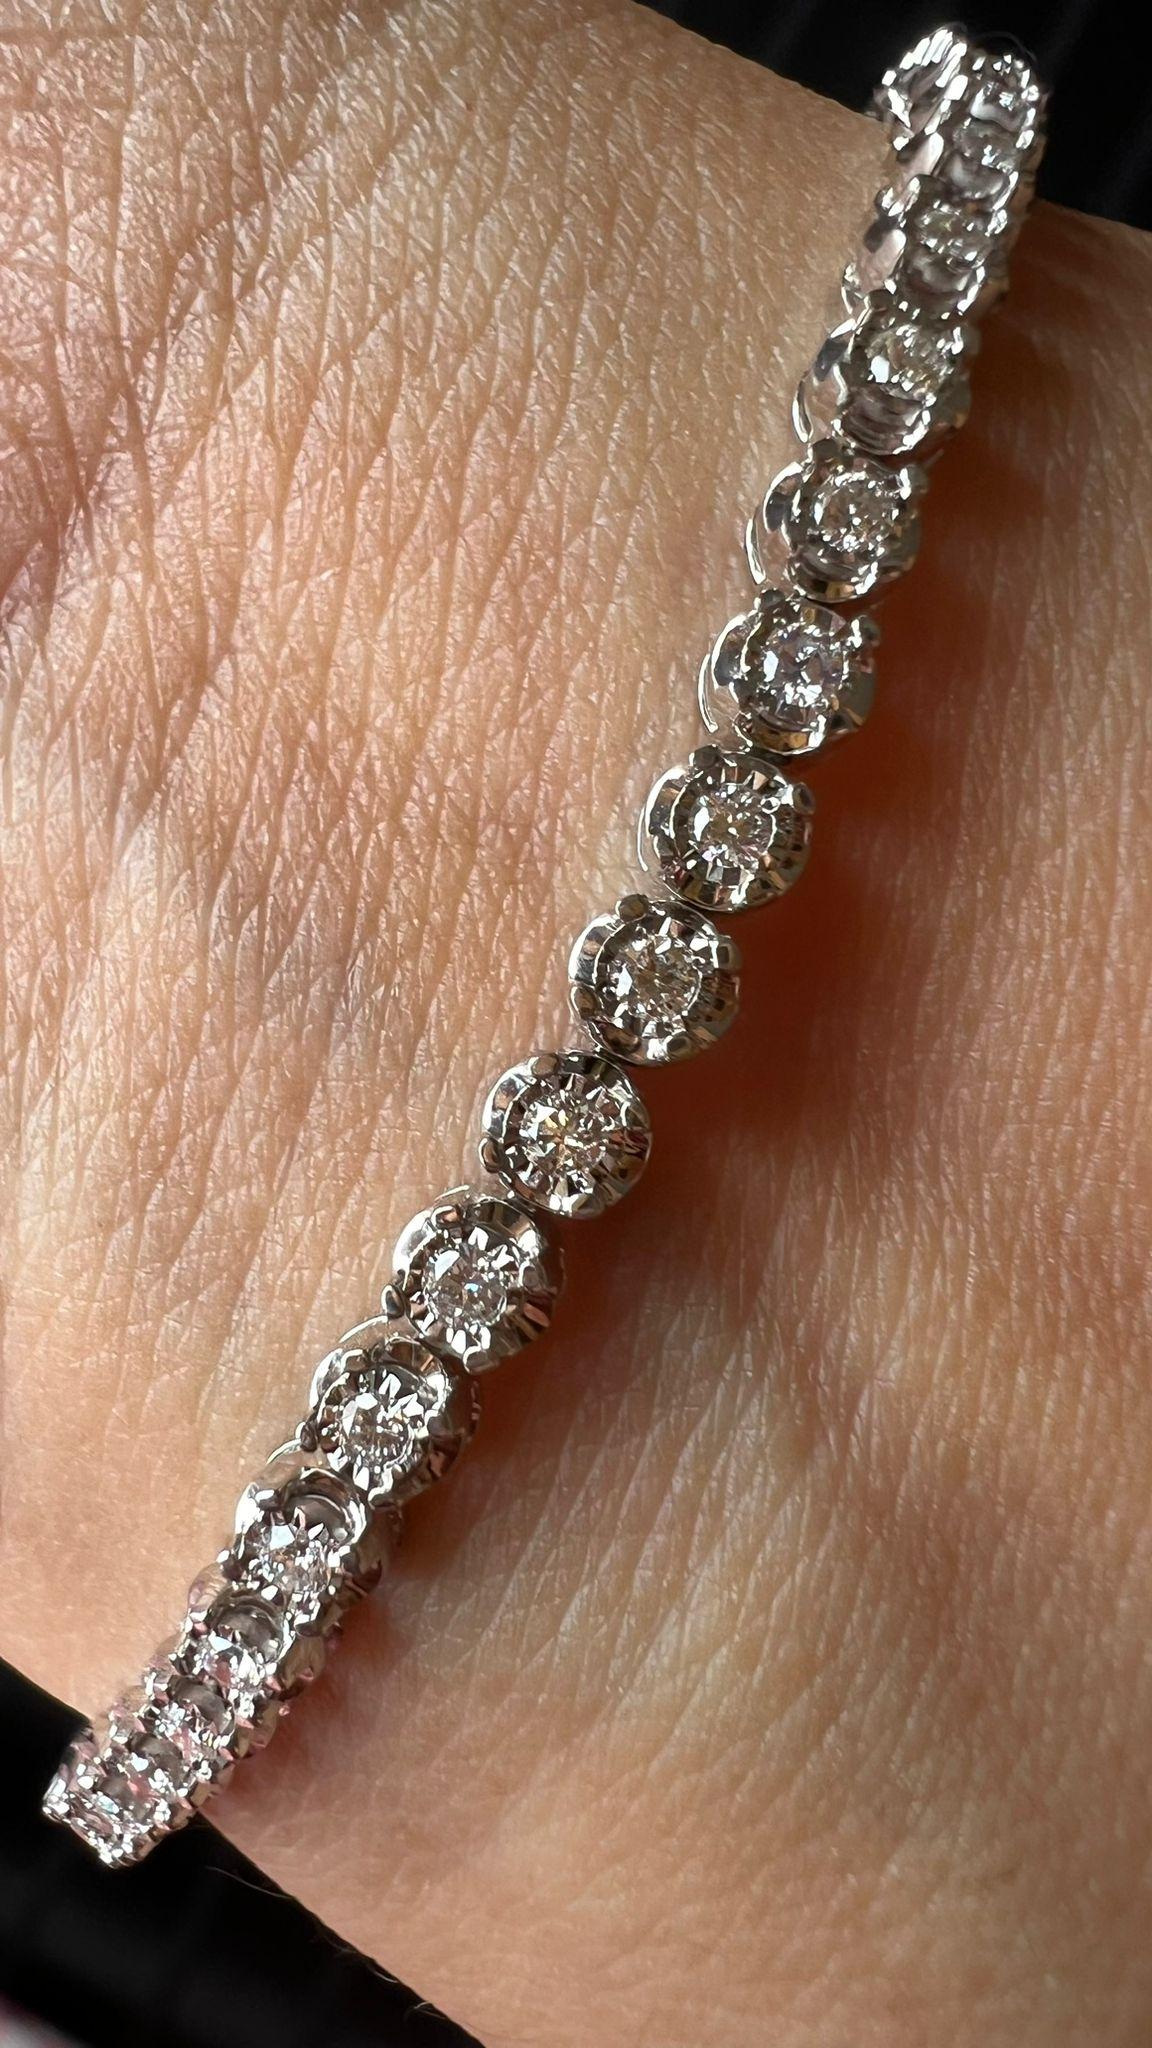 Tennis bracelet with all around diamonds made in 18kt White gold.

Each diamond is a little over 2 cent giving a larger look of 7 pointer diamonds.

A perfect value for money & an ideal bracelet for your daily wear, office wear.
A perfect gift to